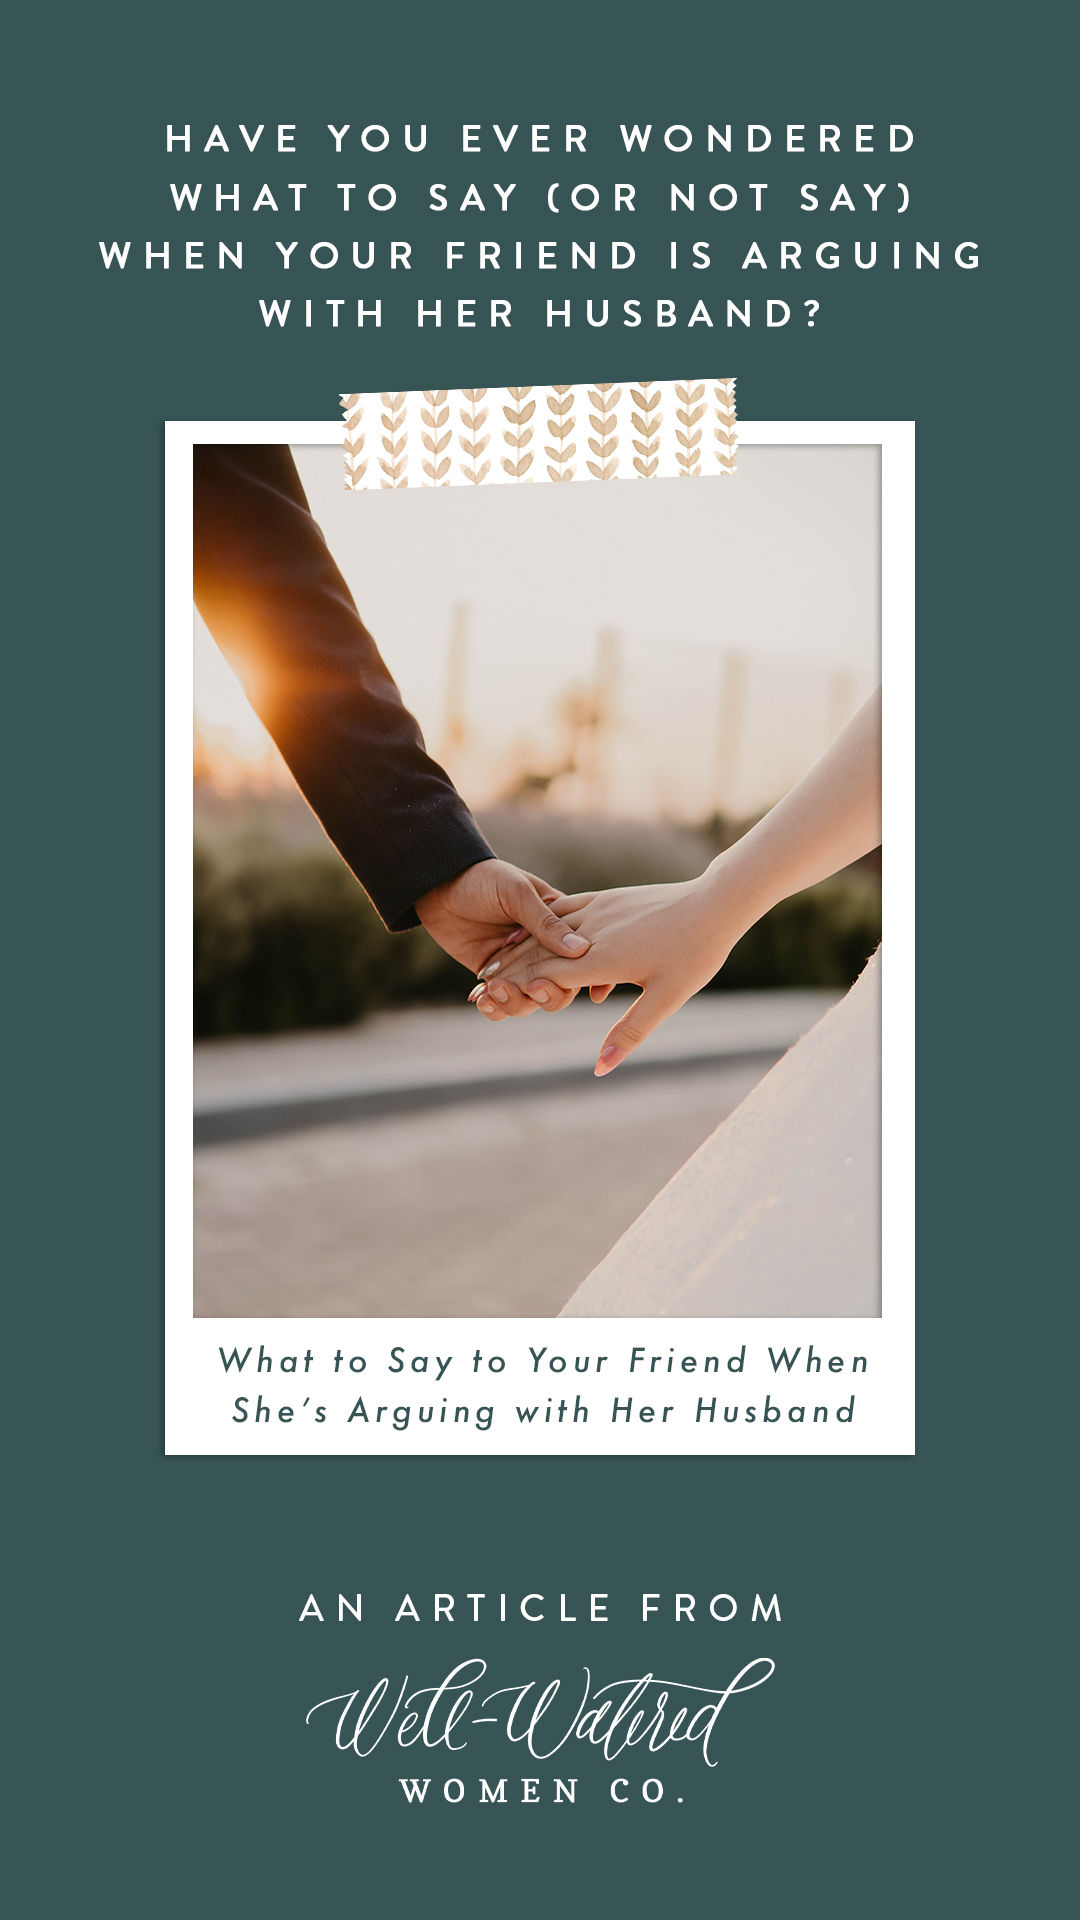 What to Say When Your Friend is Arguing with her Husband - An Article by Well-Watered Women